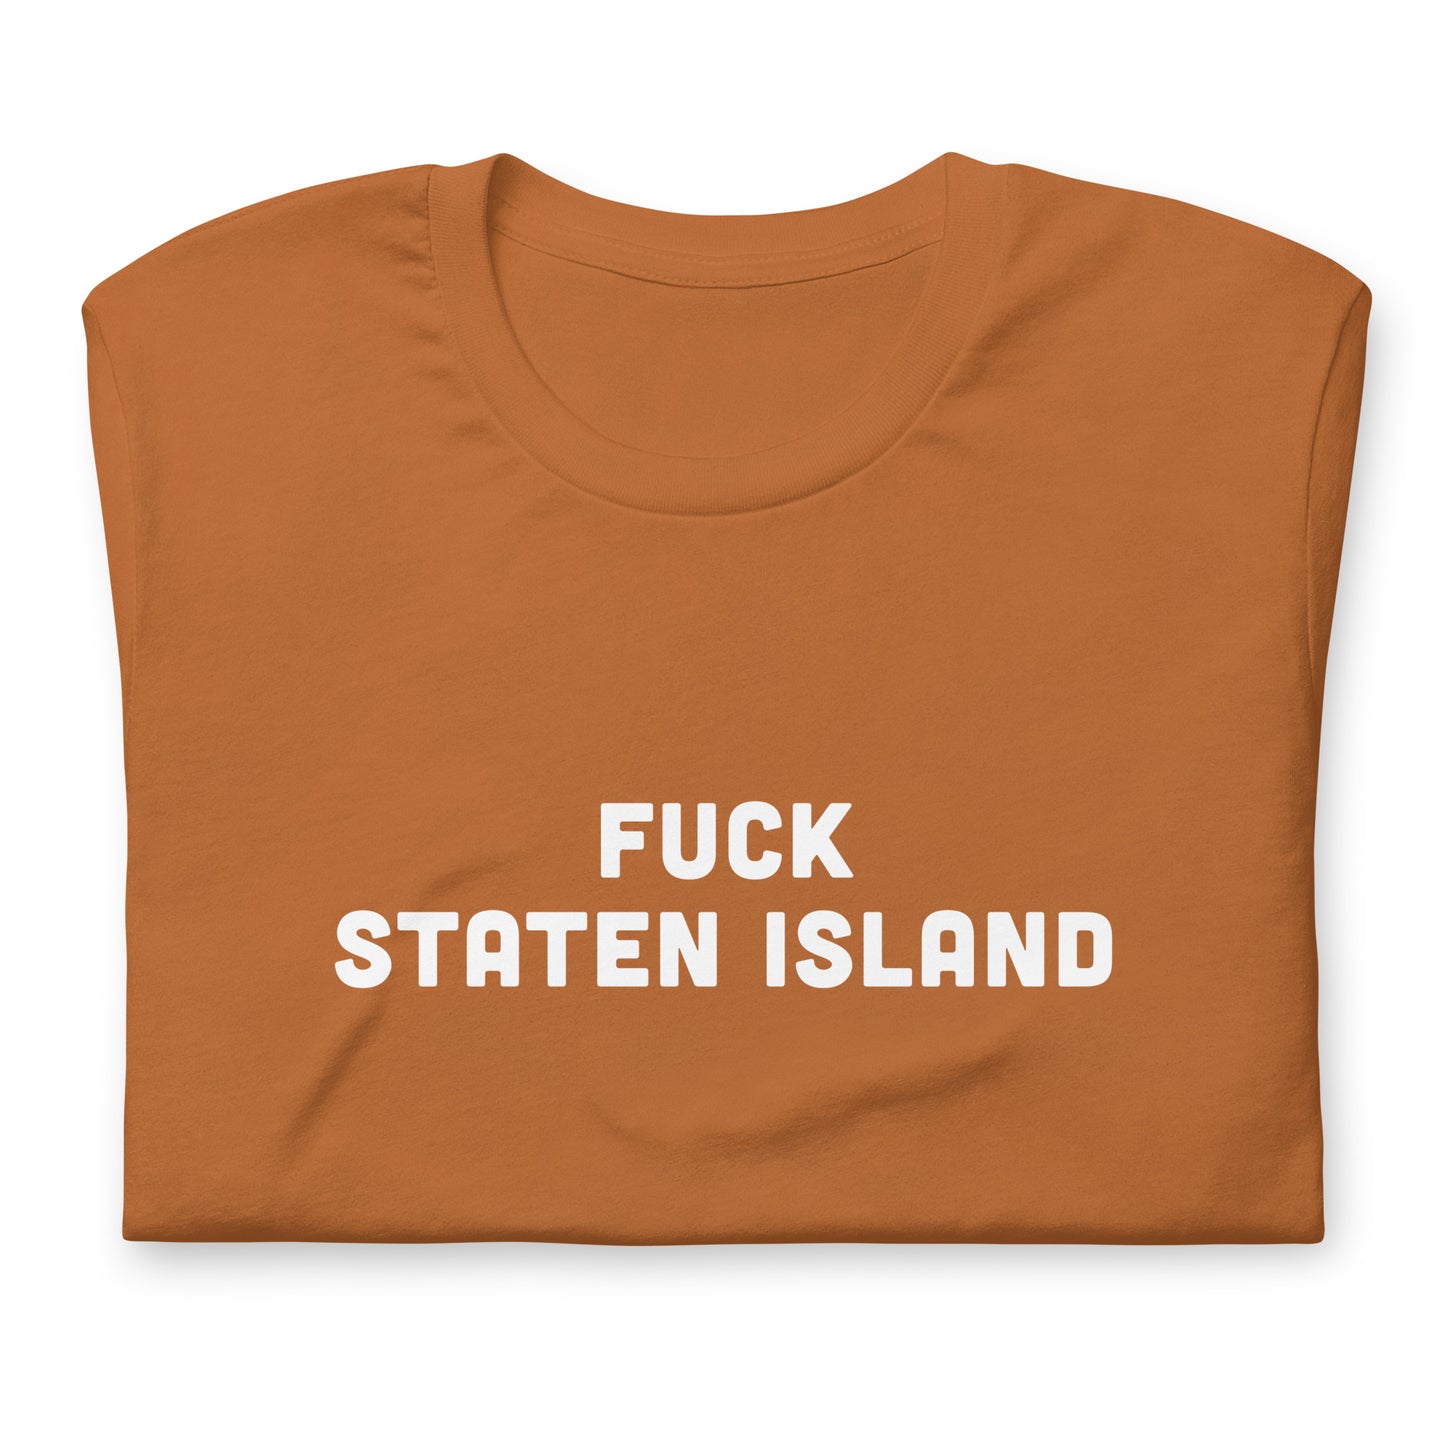 Fuck Staten Island T-Shirt Size XL Color Navy